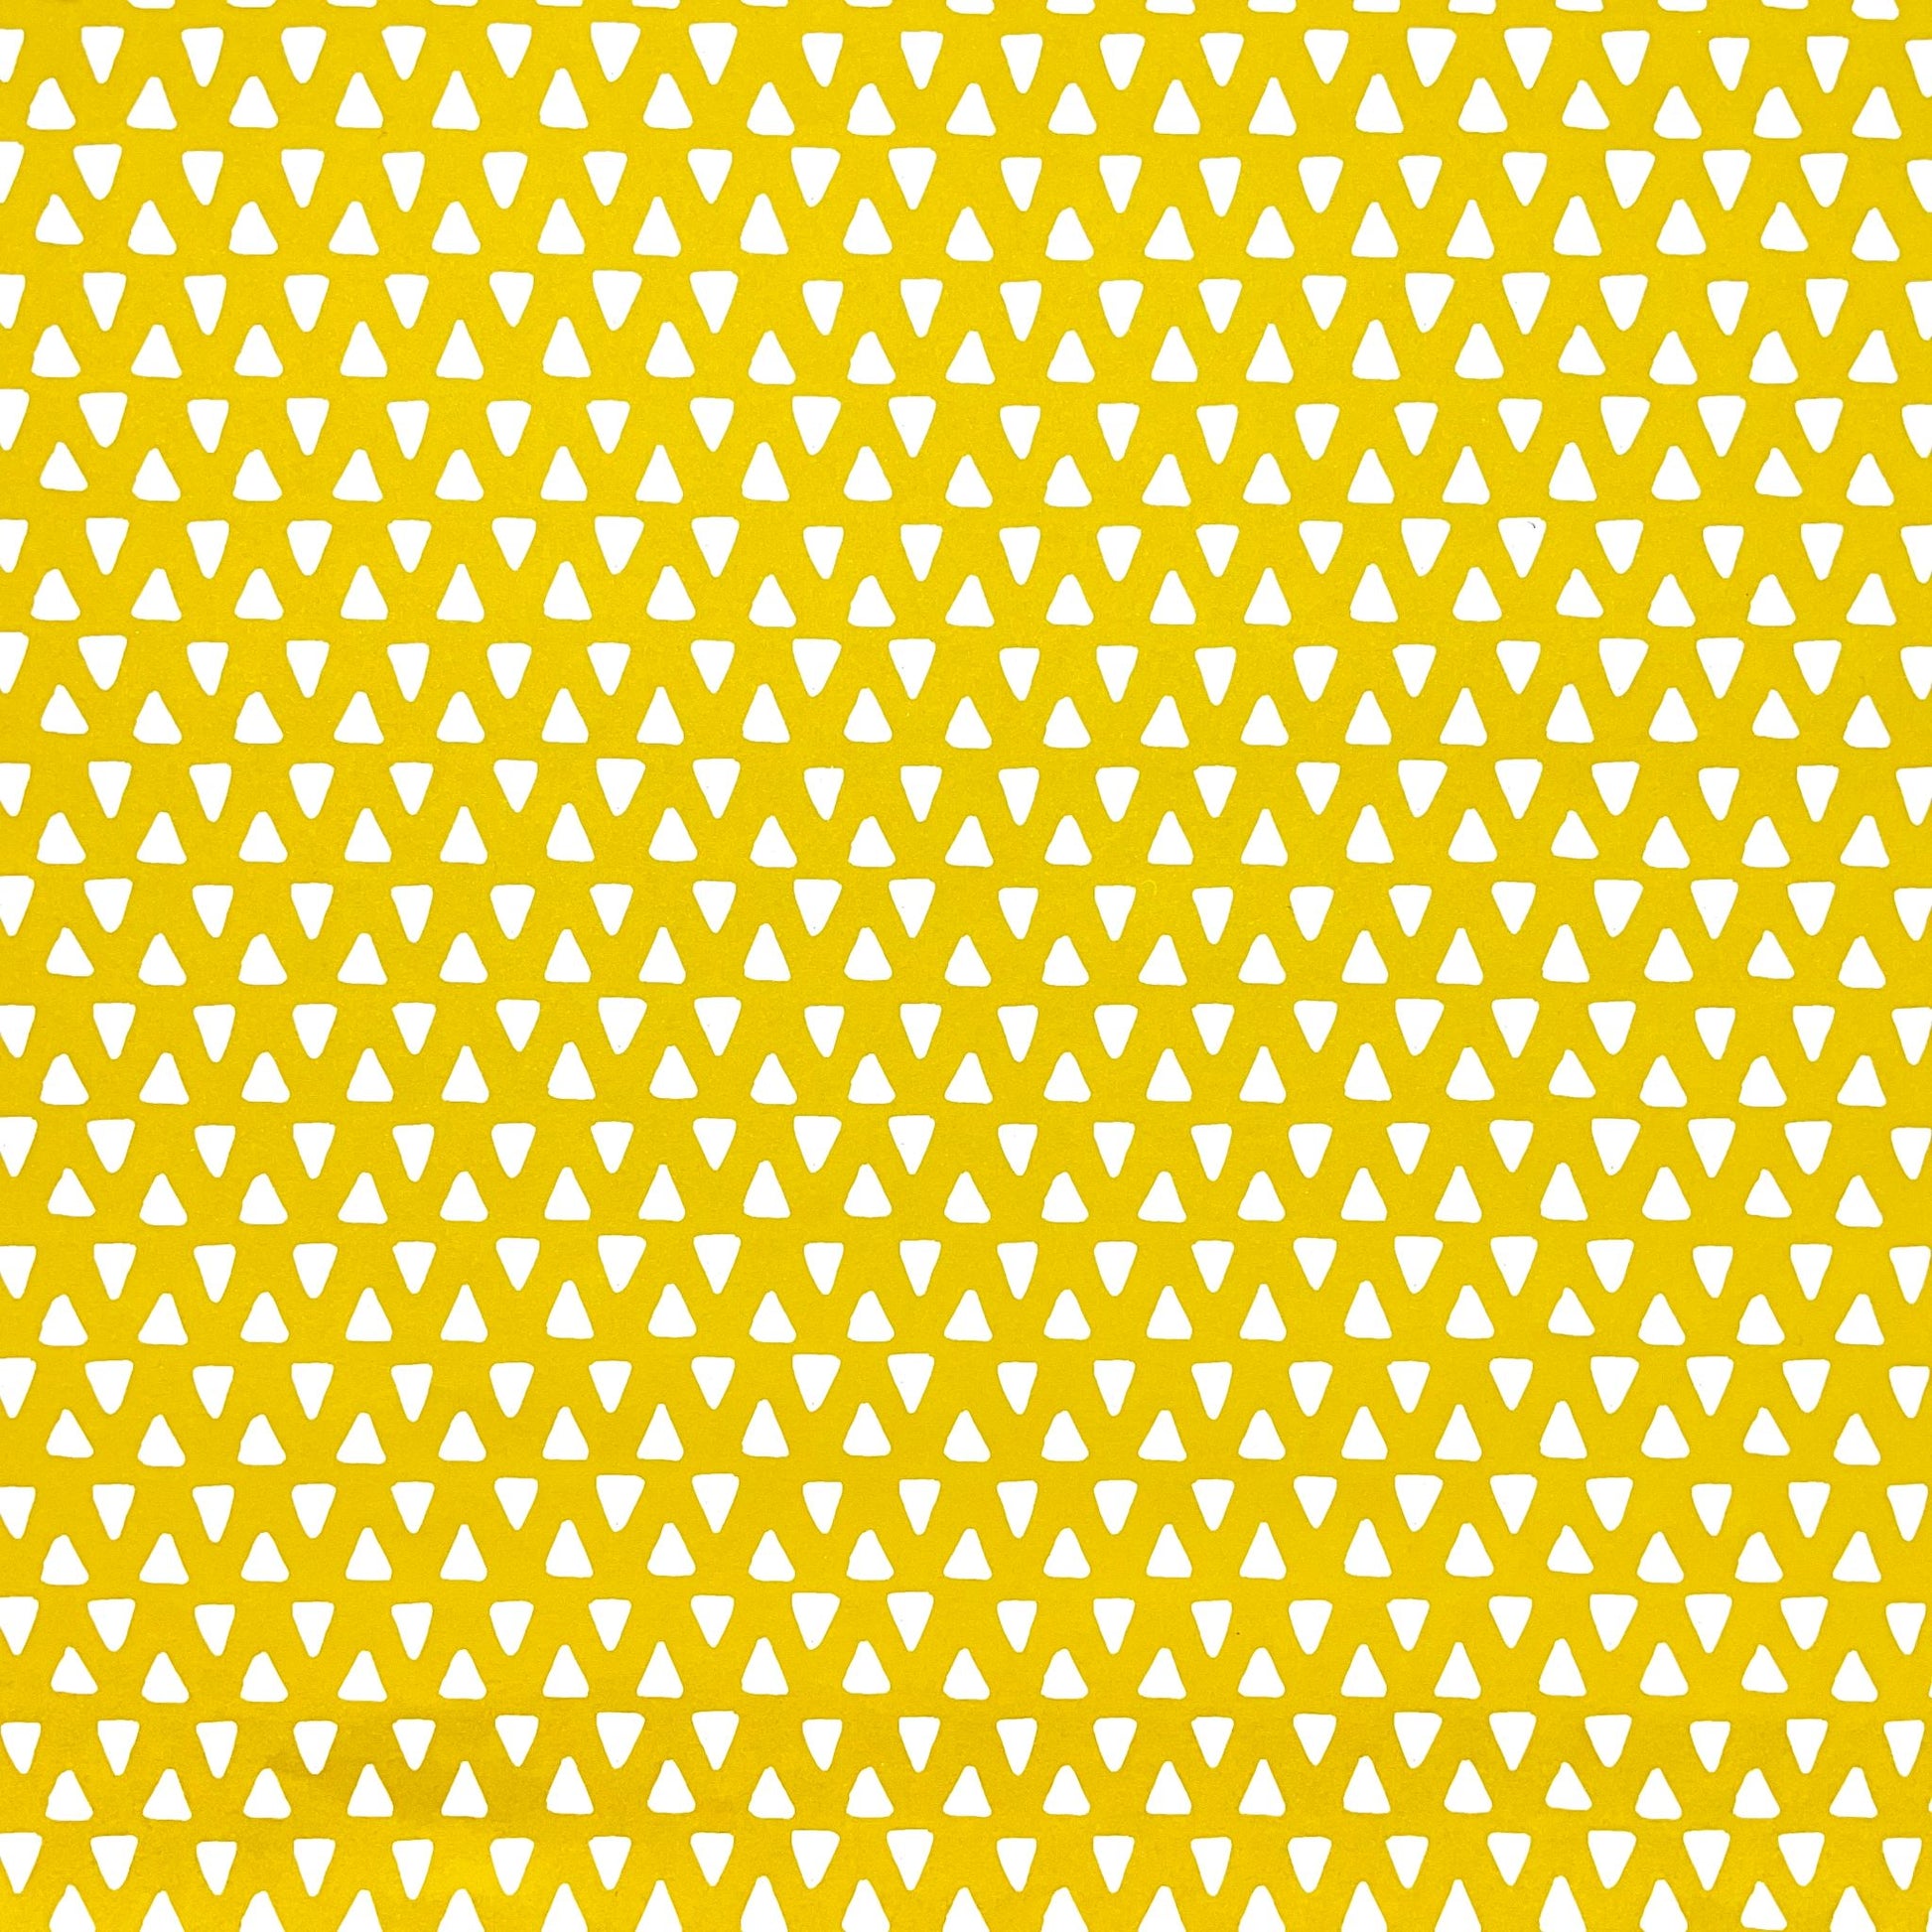 wrapping paper with yellow background and repeat pattern of little white triangles by Heather Evelyn